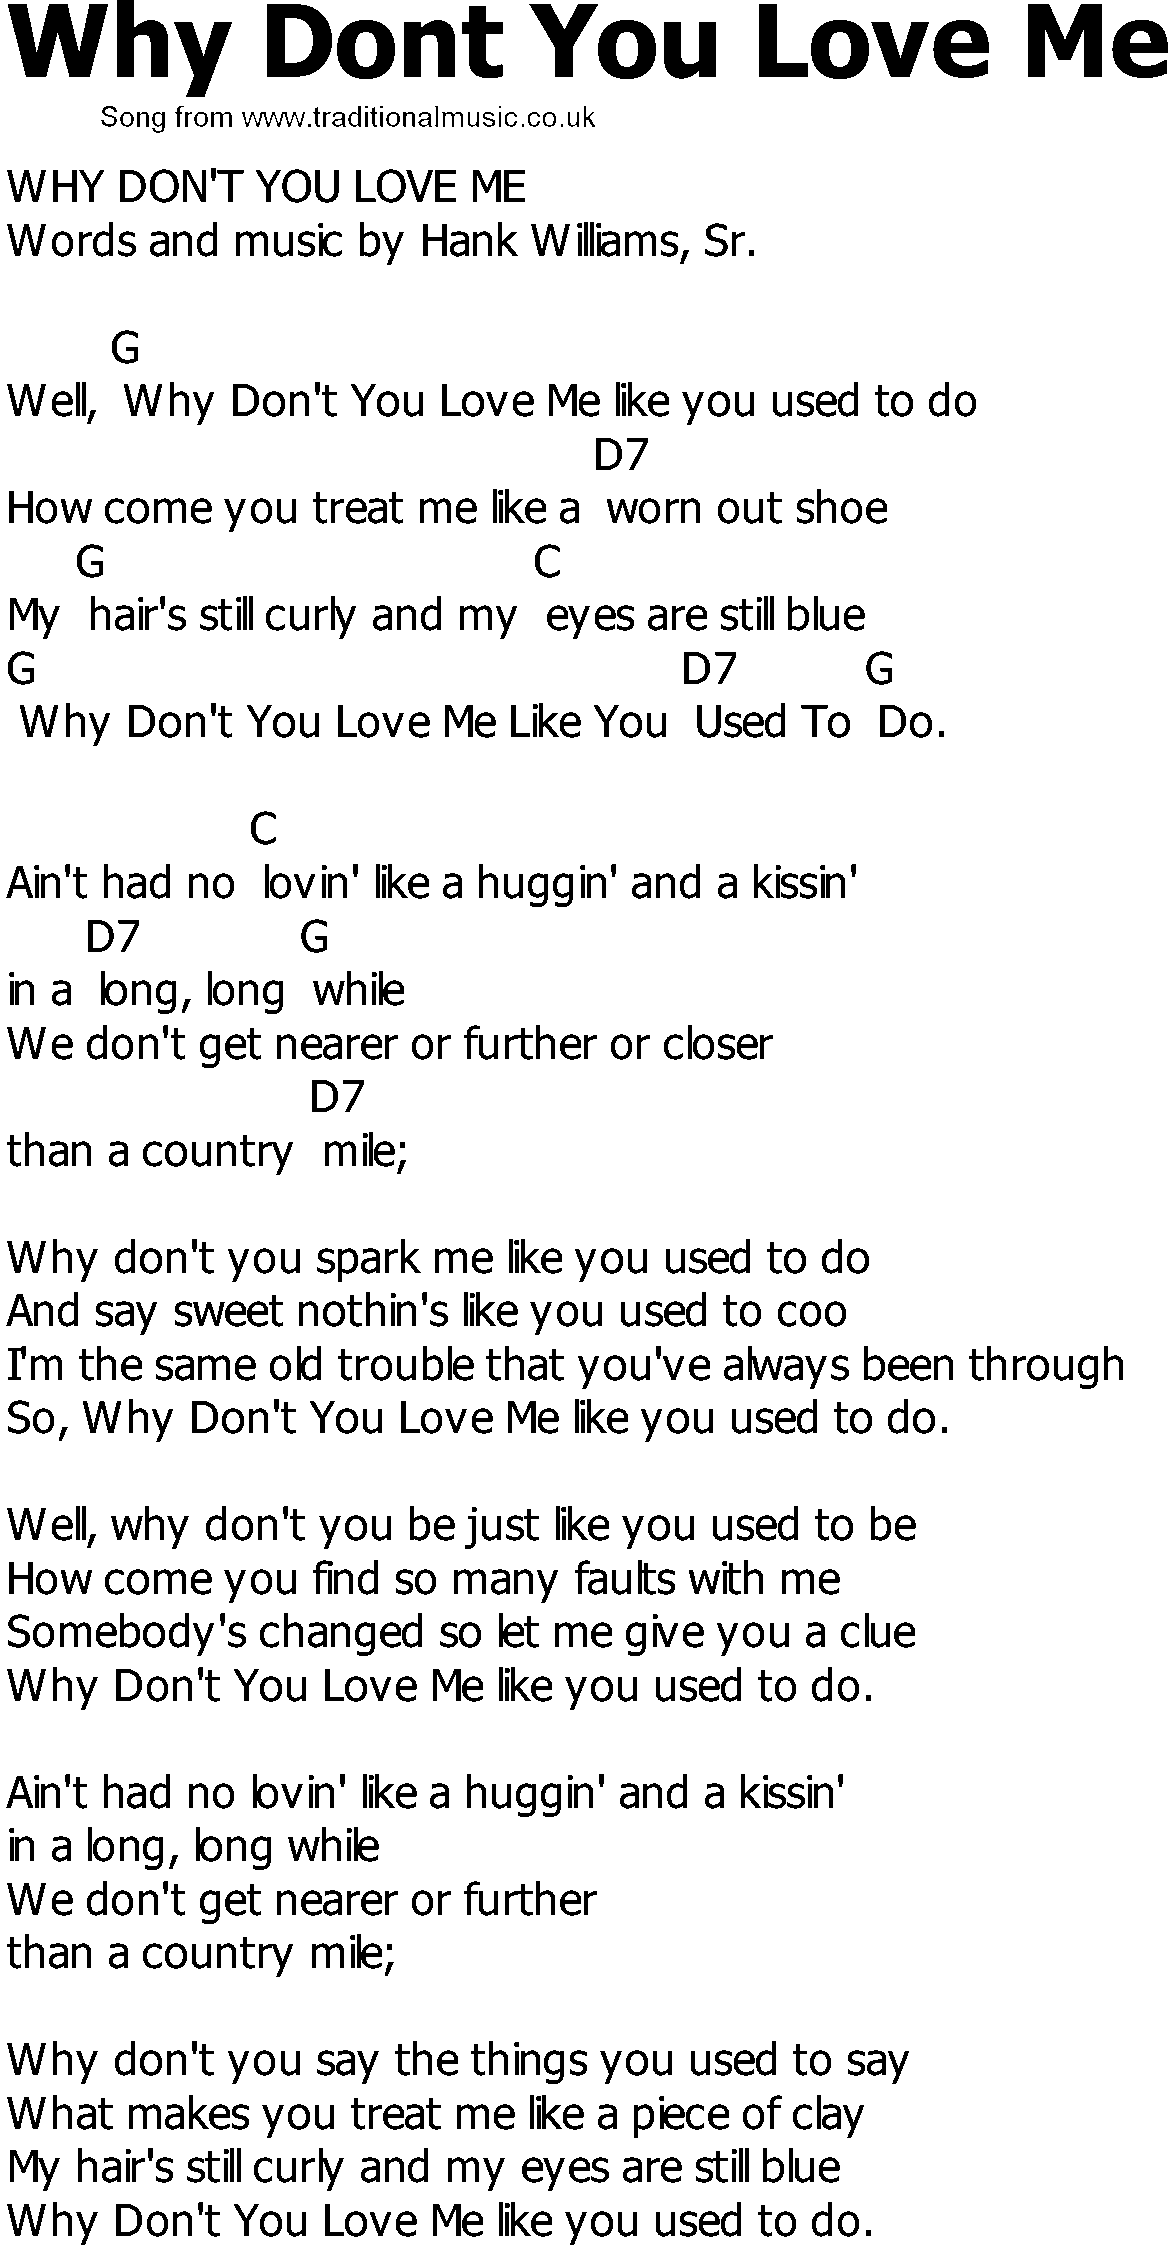 Old Country song lyrics with chords - Why Dont You Love Me